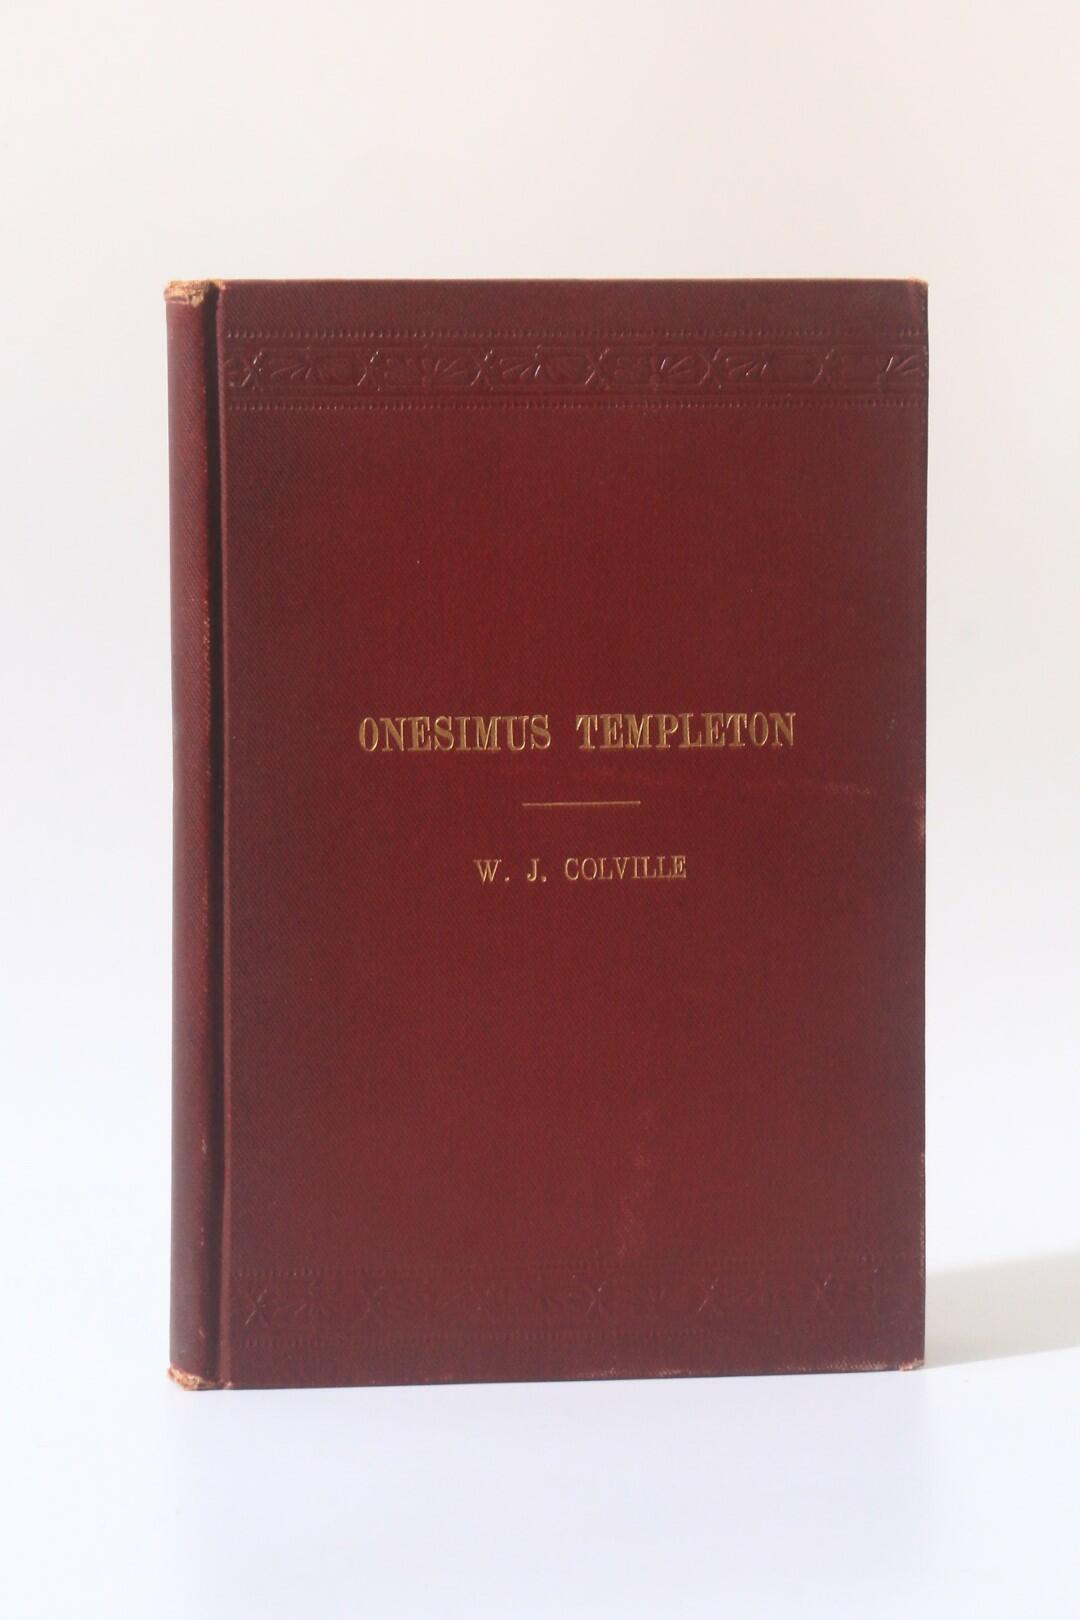 William J Colville - Onesimus Templton: A Psychical Romance - Edward Lovell, 1898, First Edition.